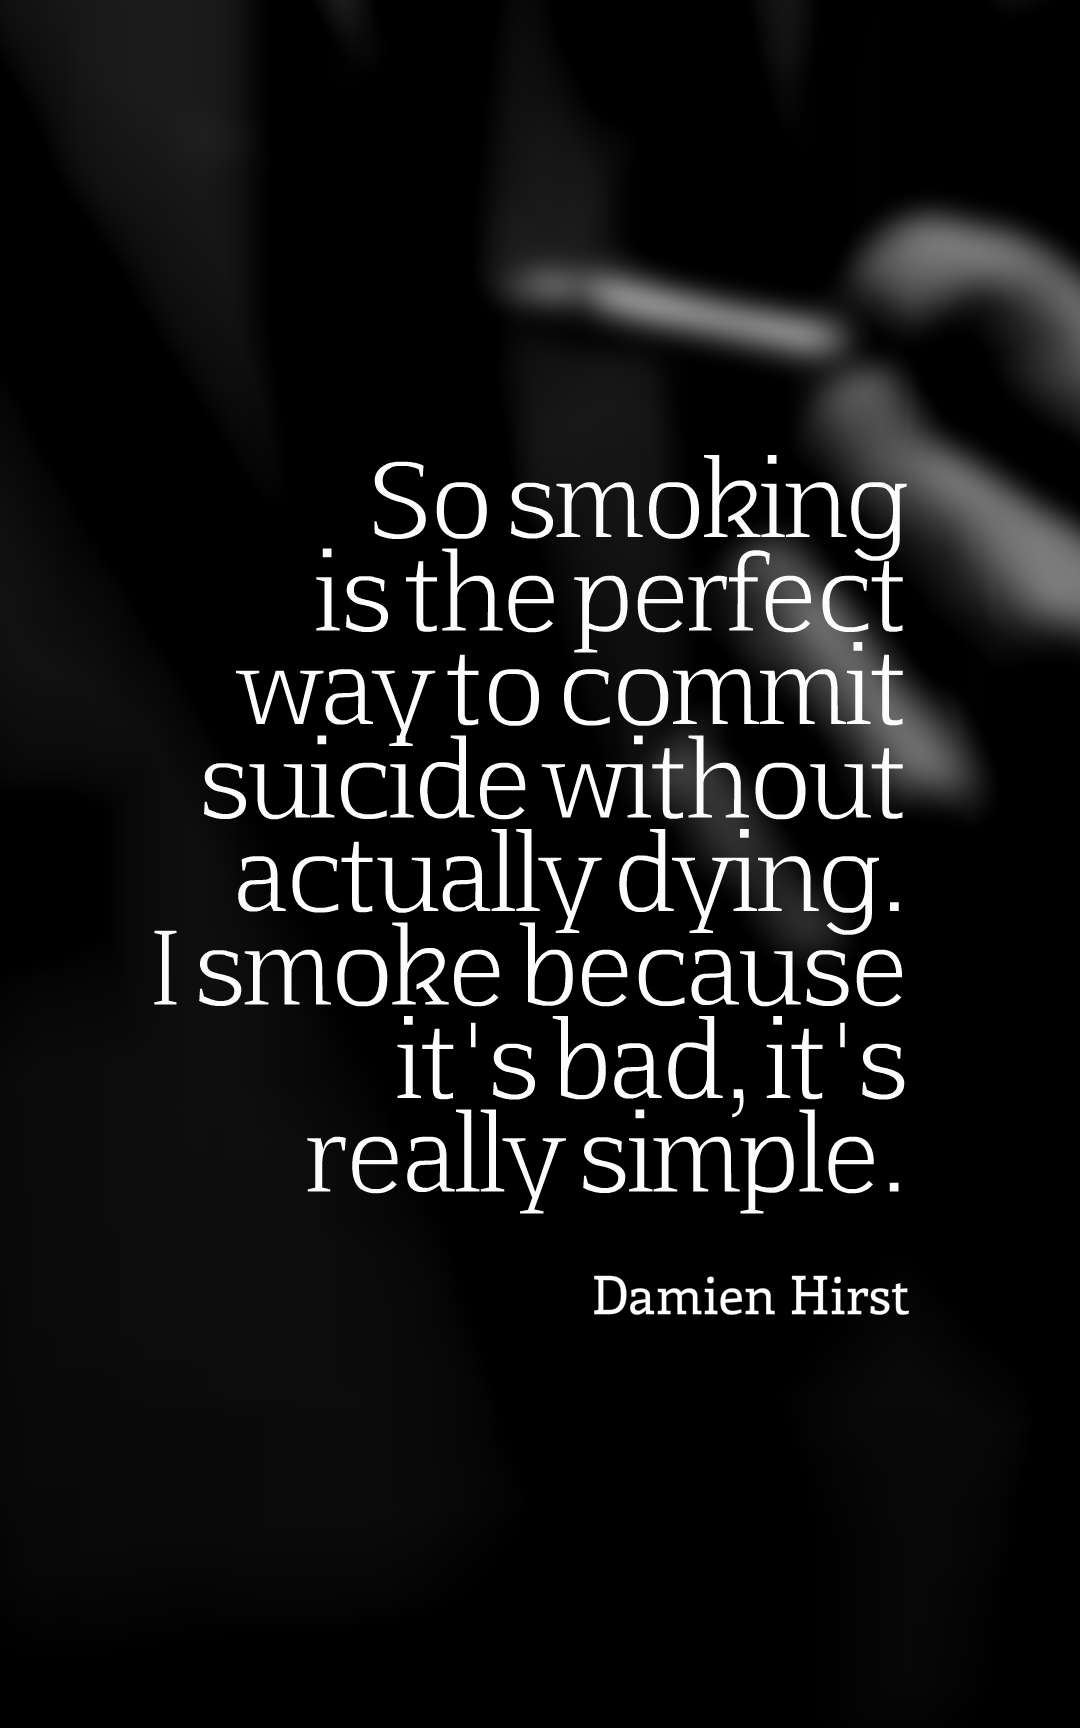 So smoking is the perfect way to commit suicide without actually dying. I smoke because it's bad, it's really simple.